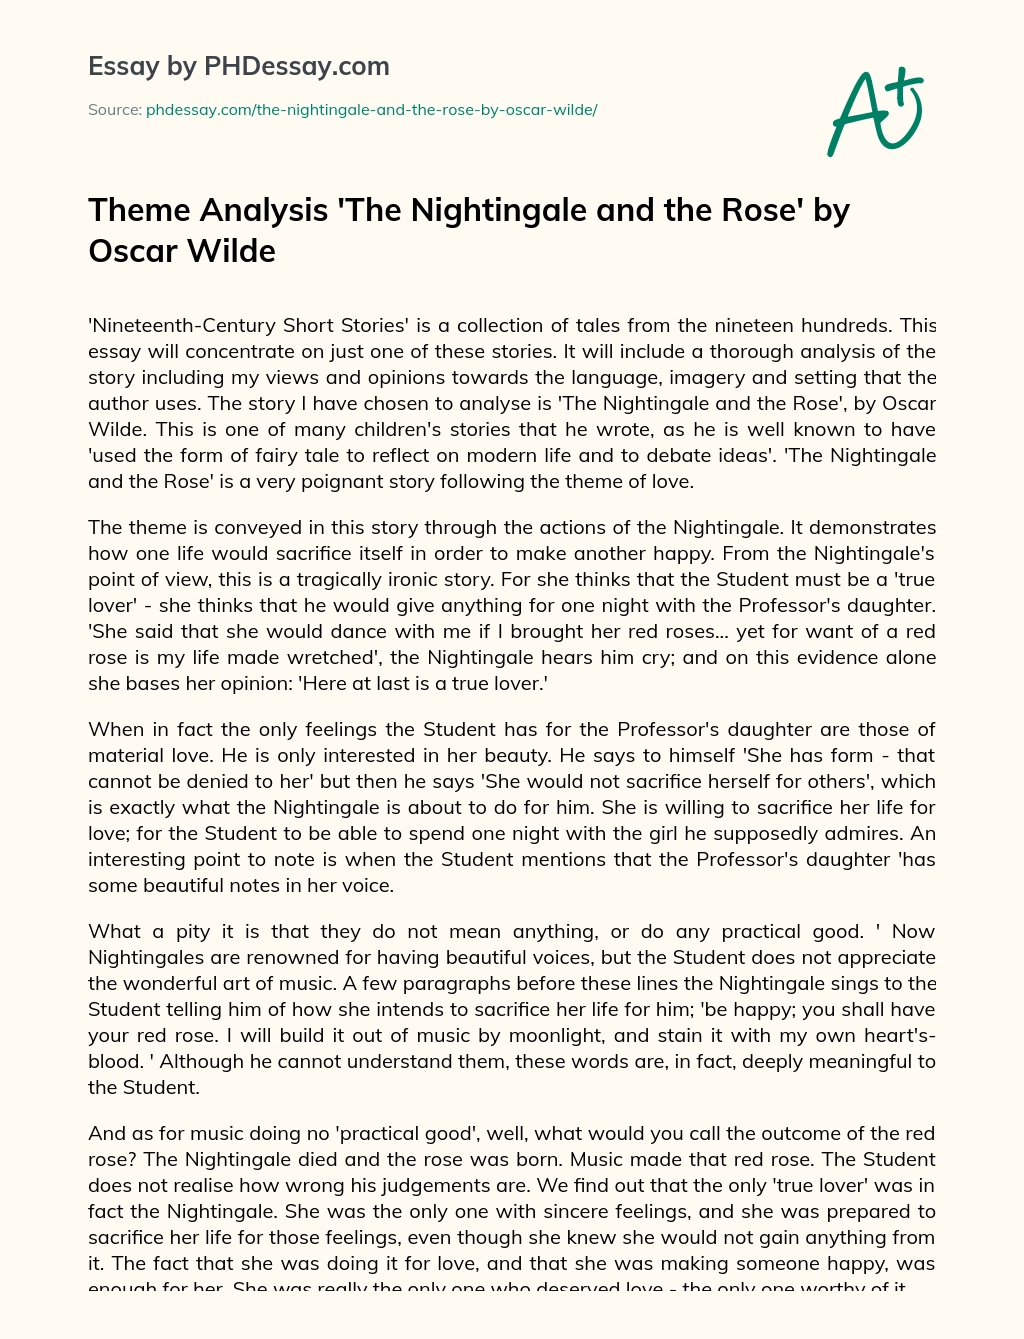 Theme Analysis ‘The Nightingale and the Rose’ by Oscar Wilde essay